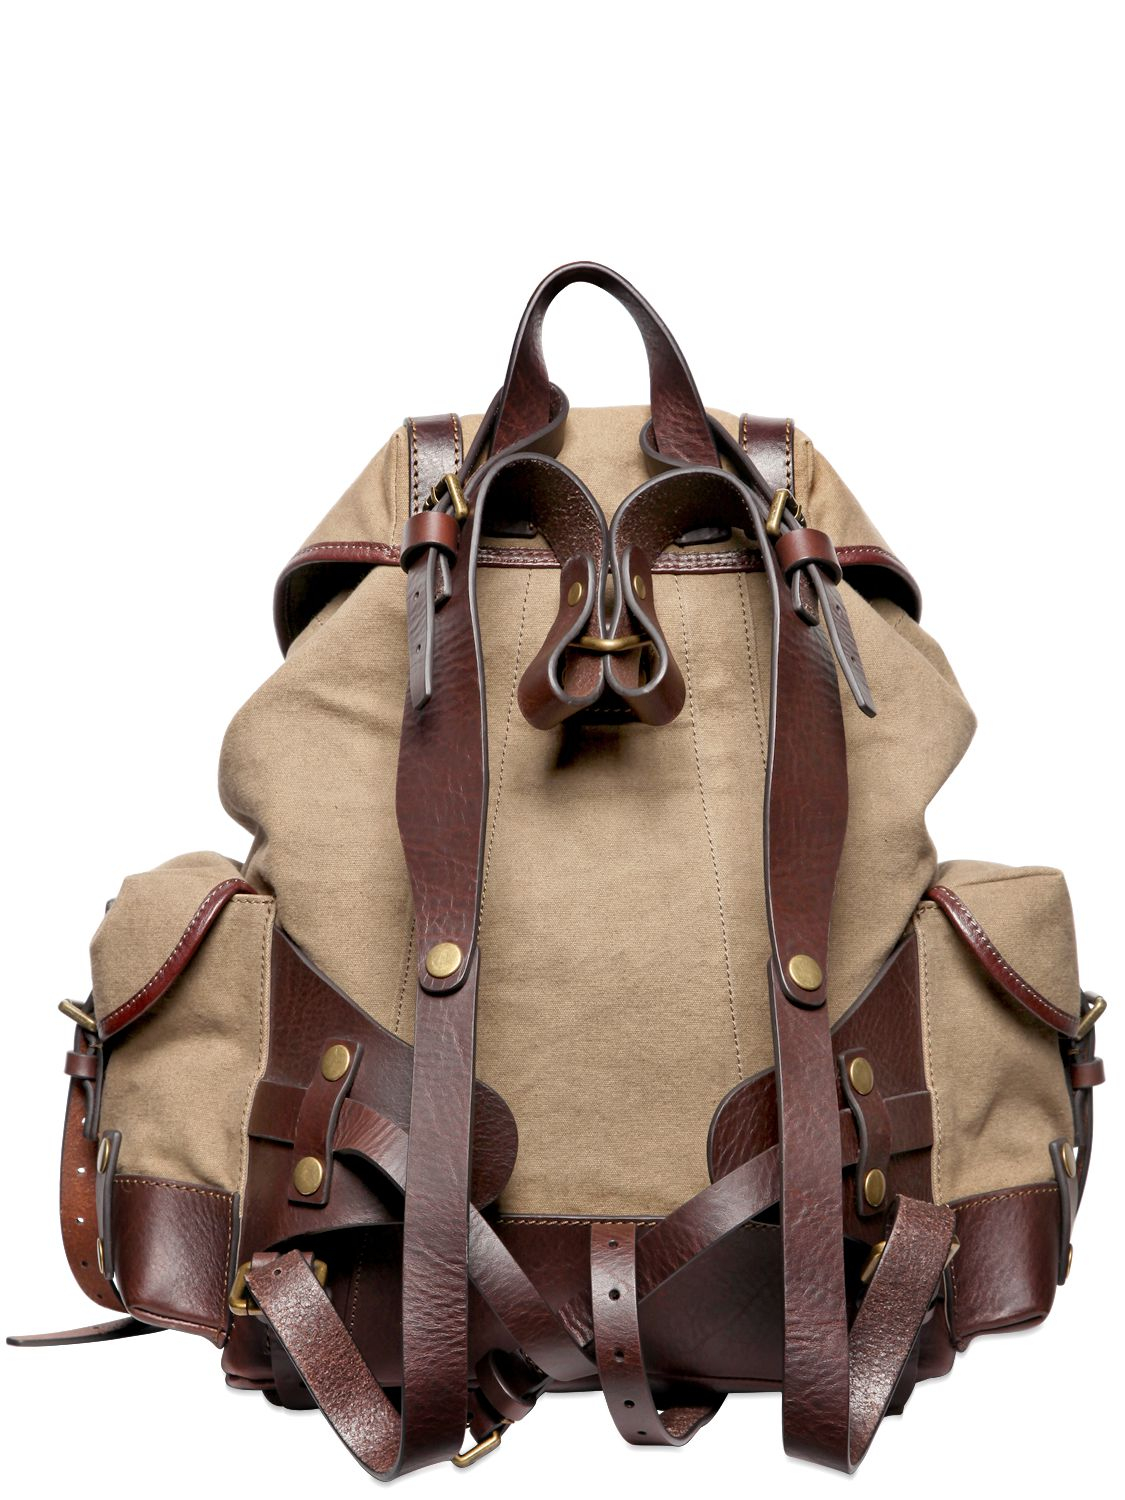 DSquared² Cotton Canvas Leather Backpack in Military Green (Natural) for Men - Lyst